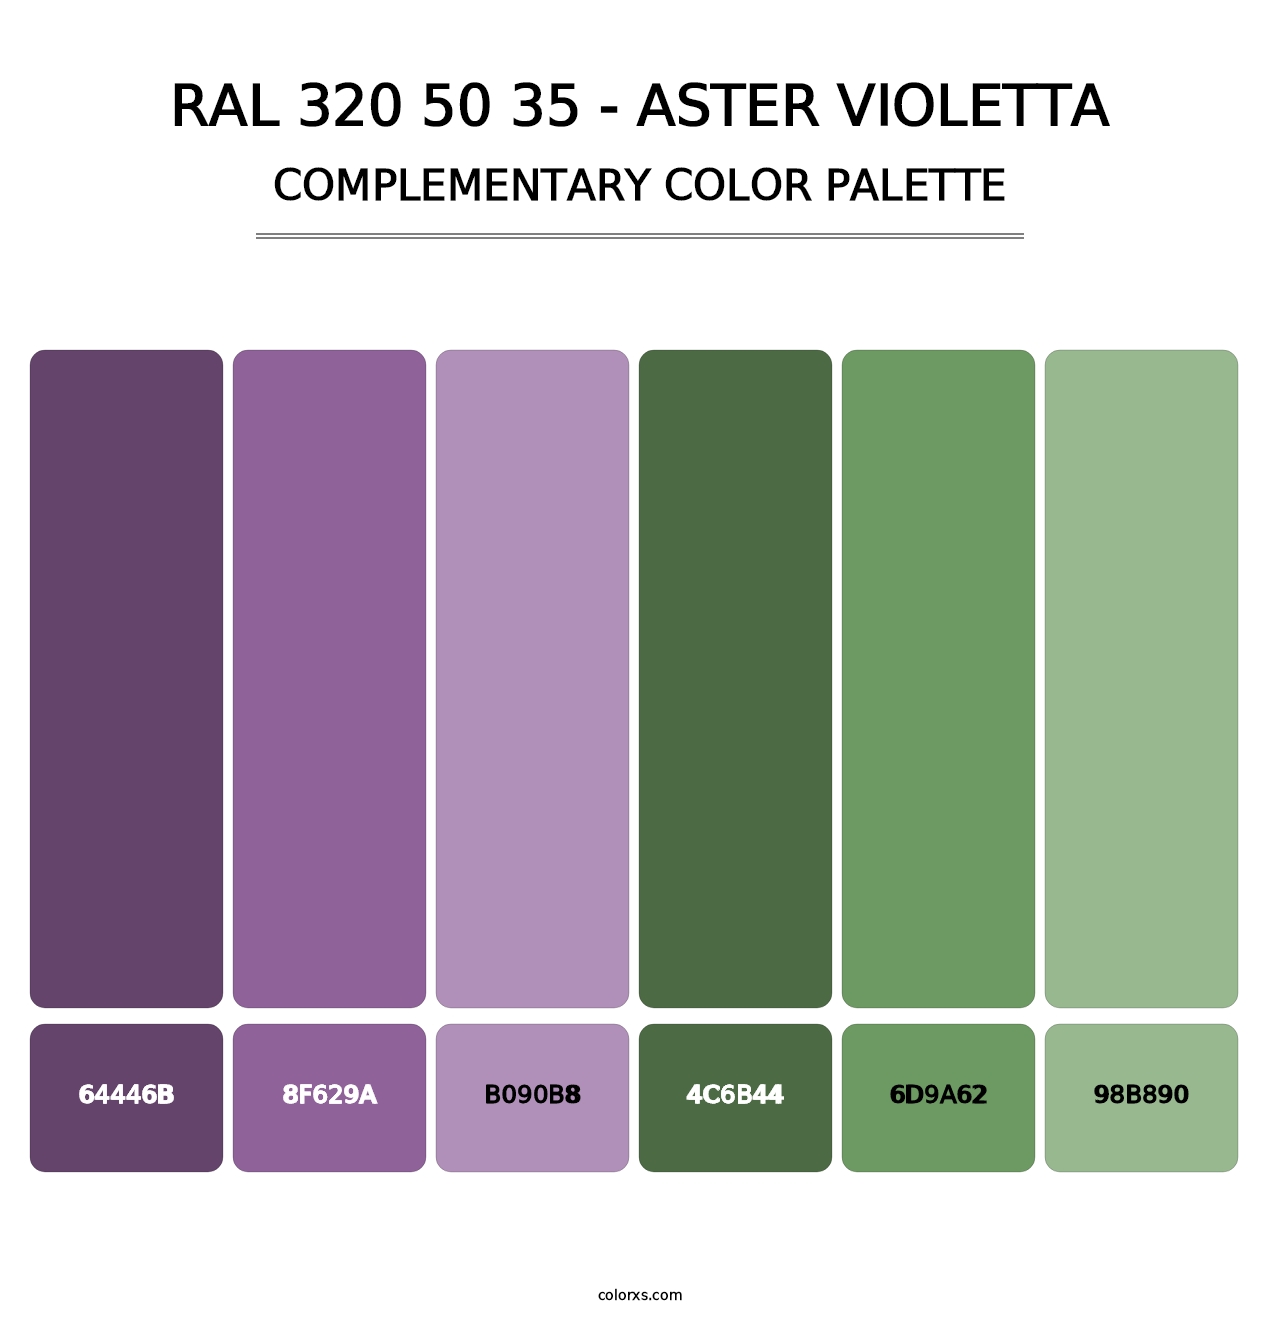 RAL 320 50 35 - Aster Violetta - Complementary Color Palette